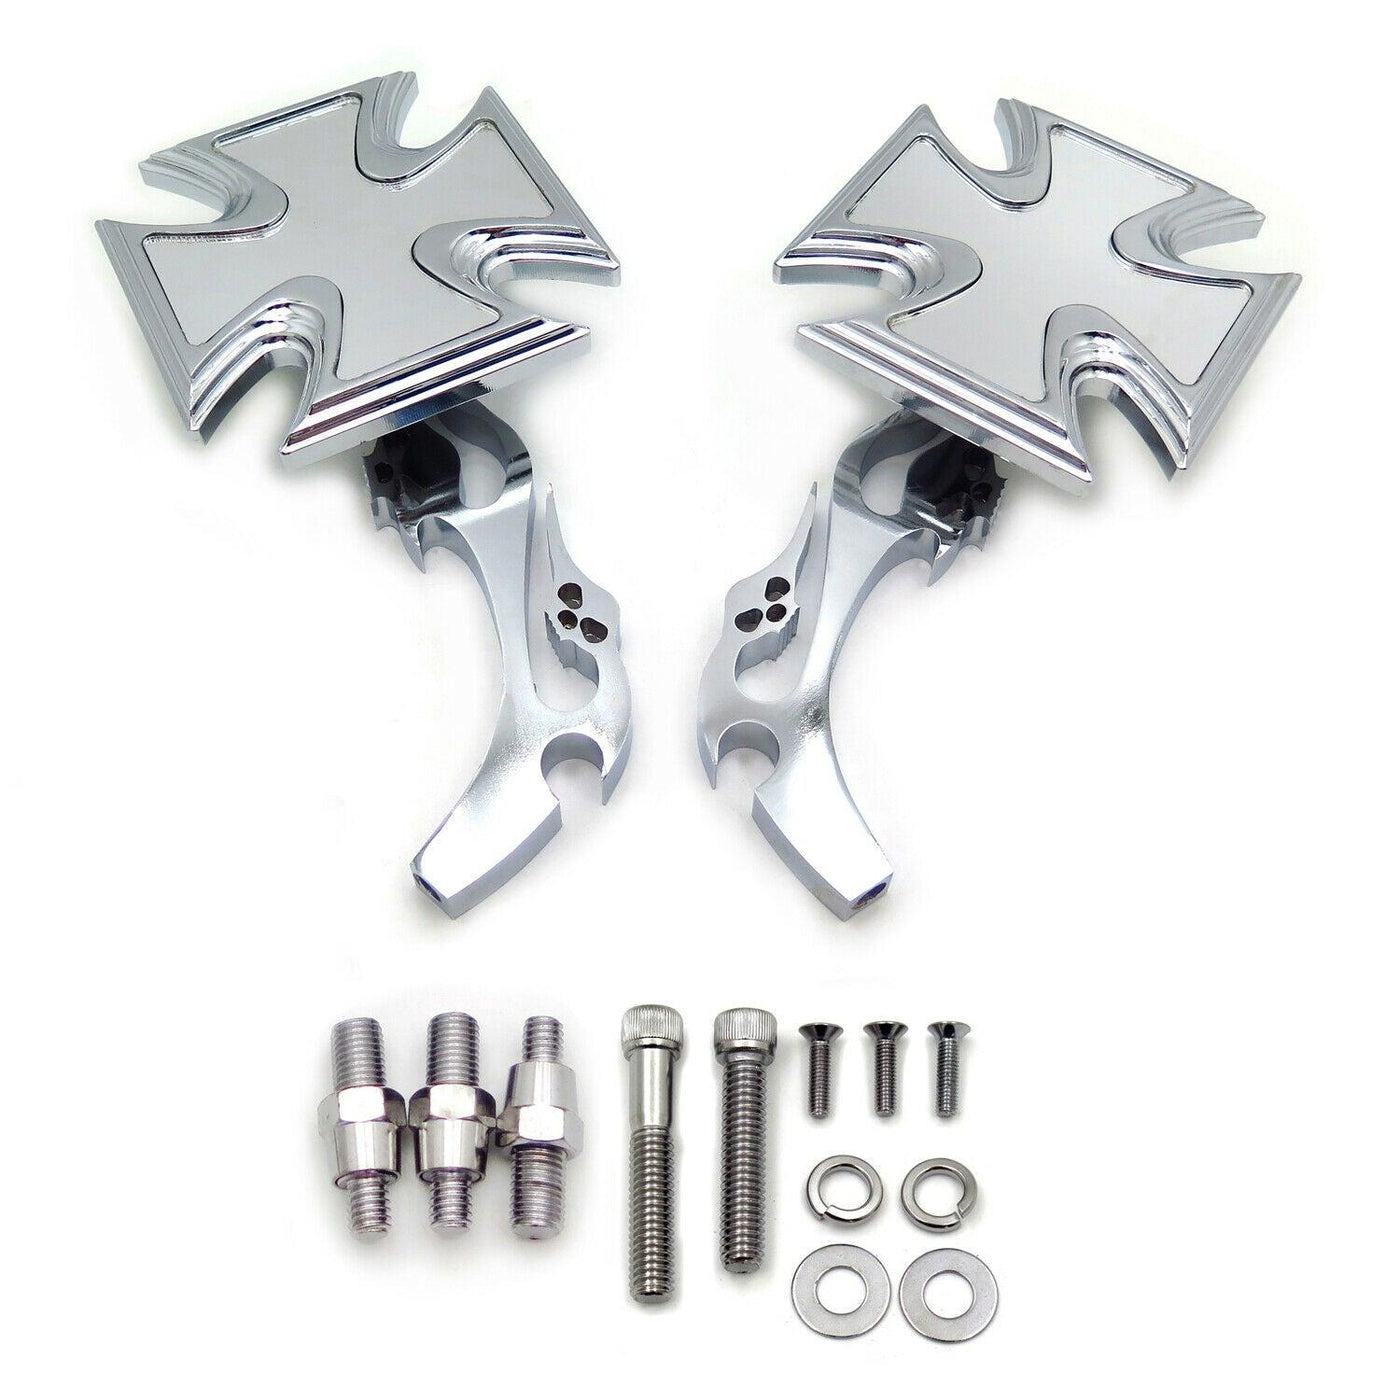 Maltese Cross Running Acrylic Mirrors For Harley Dyna Wide Glide Chrome - Moto Life Products